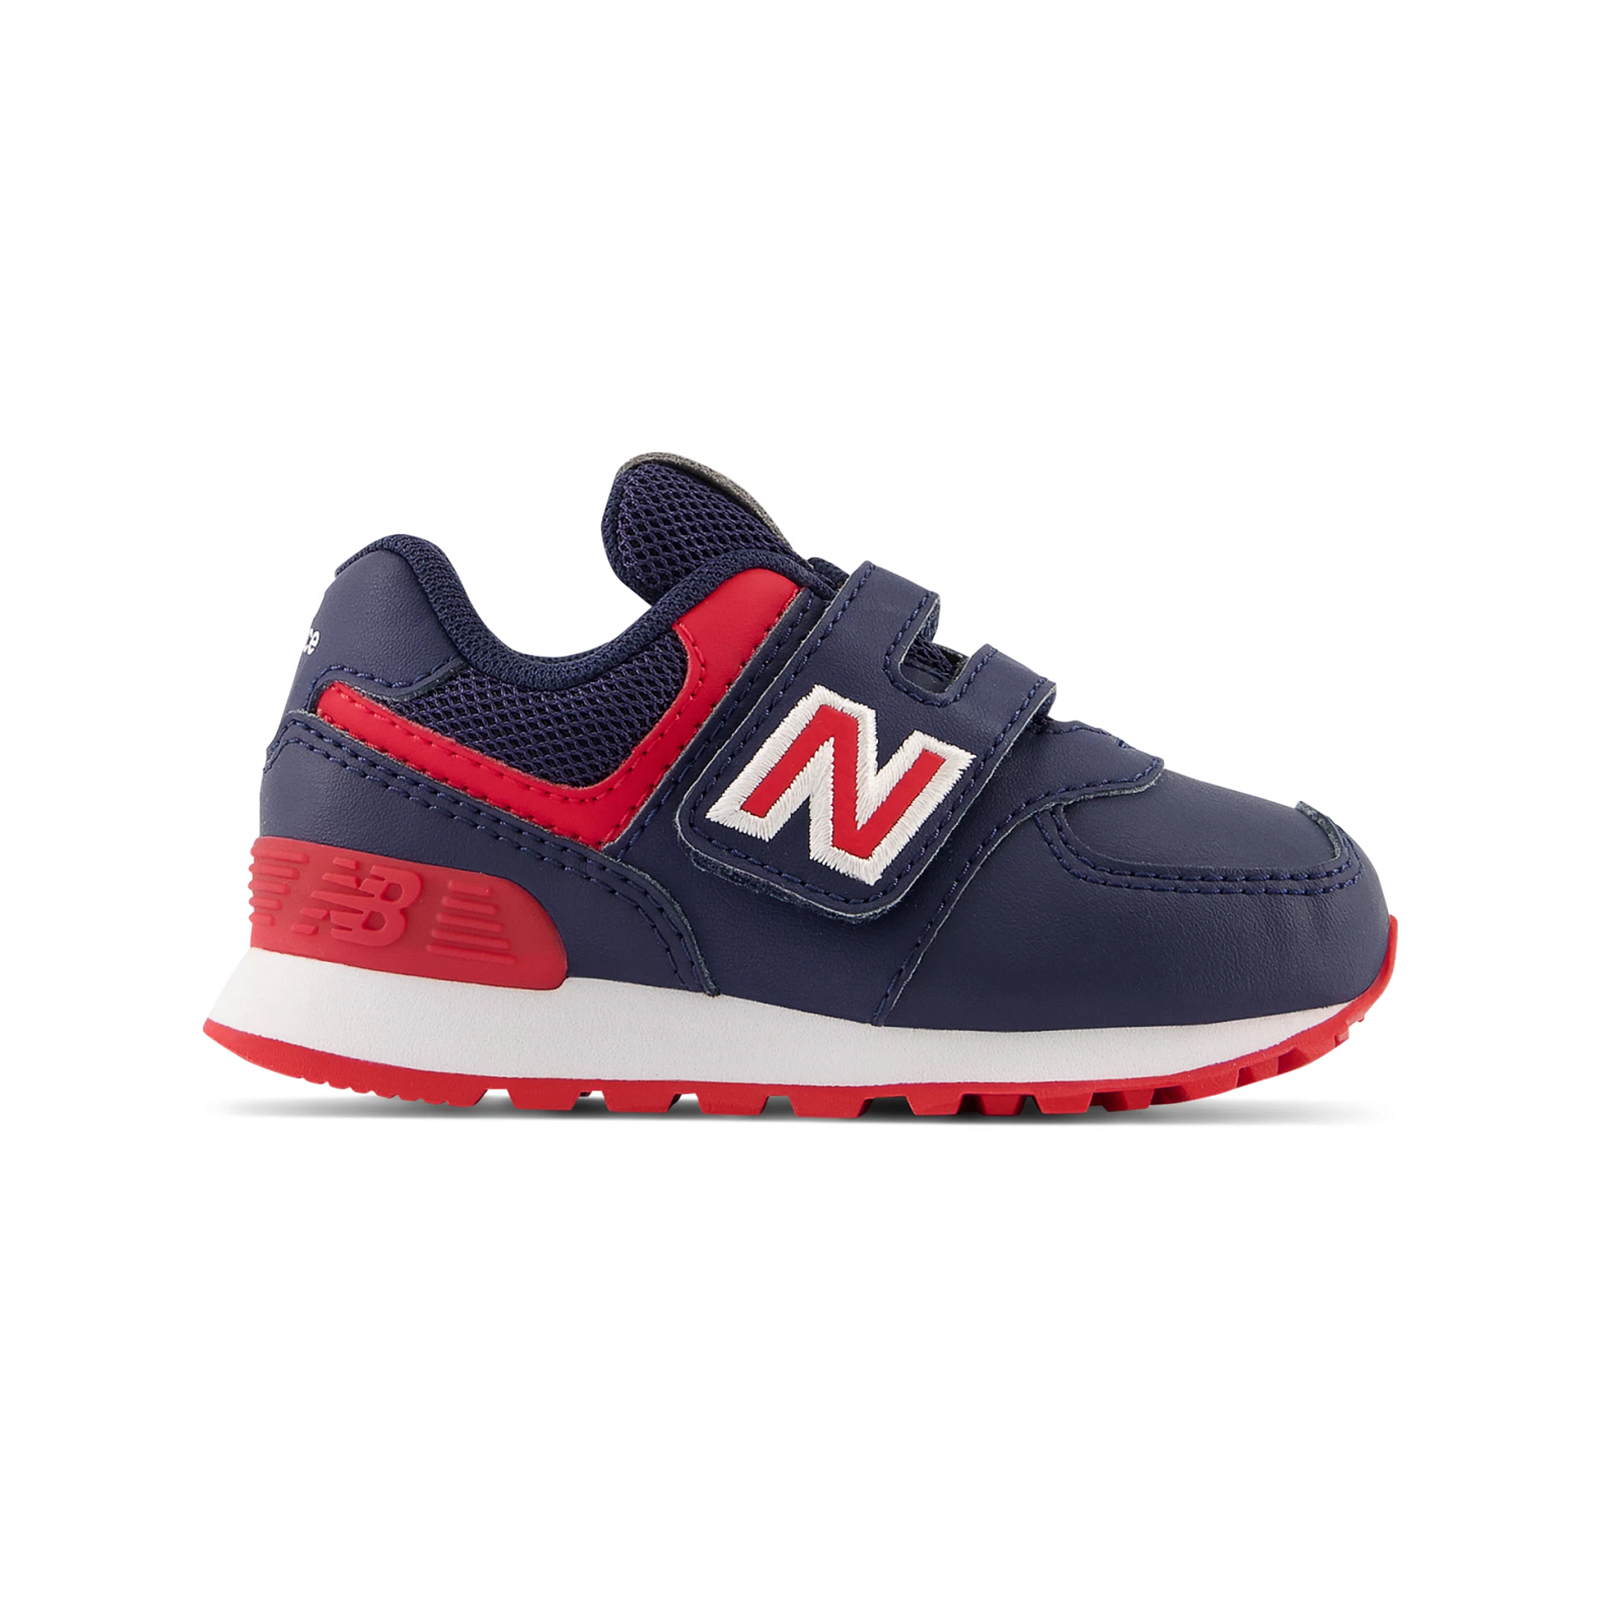 New balance ls - SHOES CLASSIC RUNNING - NATURAL INDIGO Παιδικά > Παπούτσια > Sneaker > Παπούτσι Low Cut